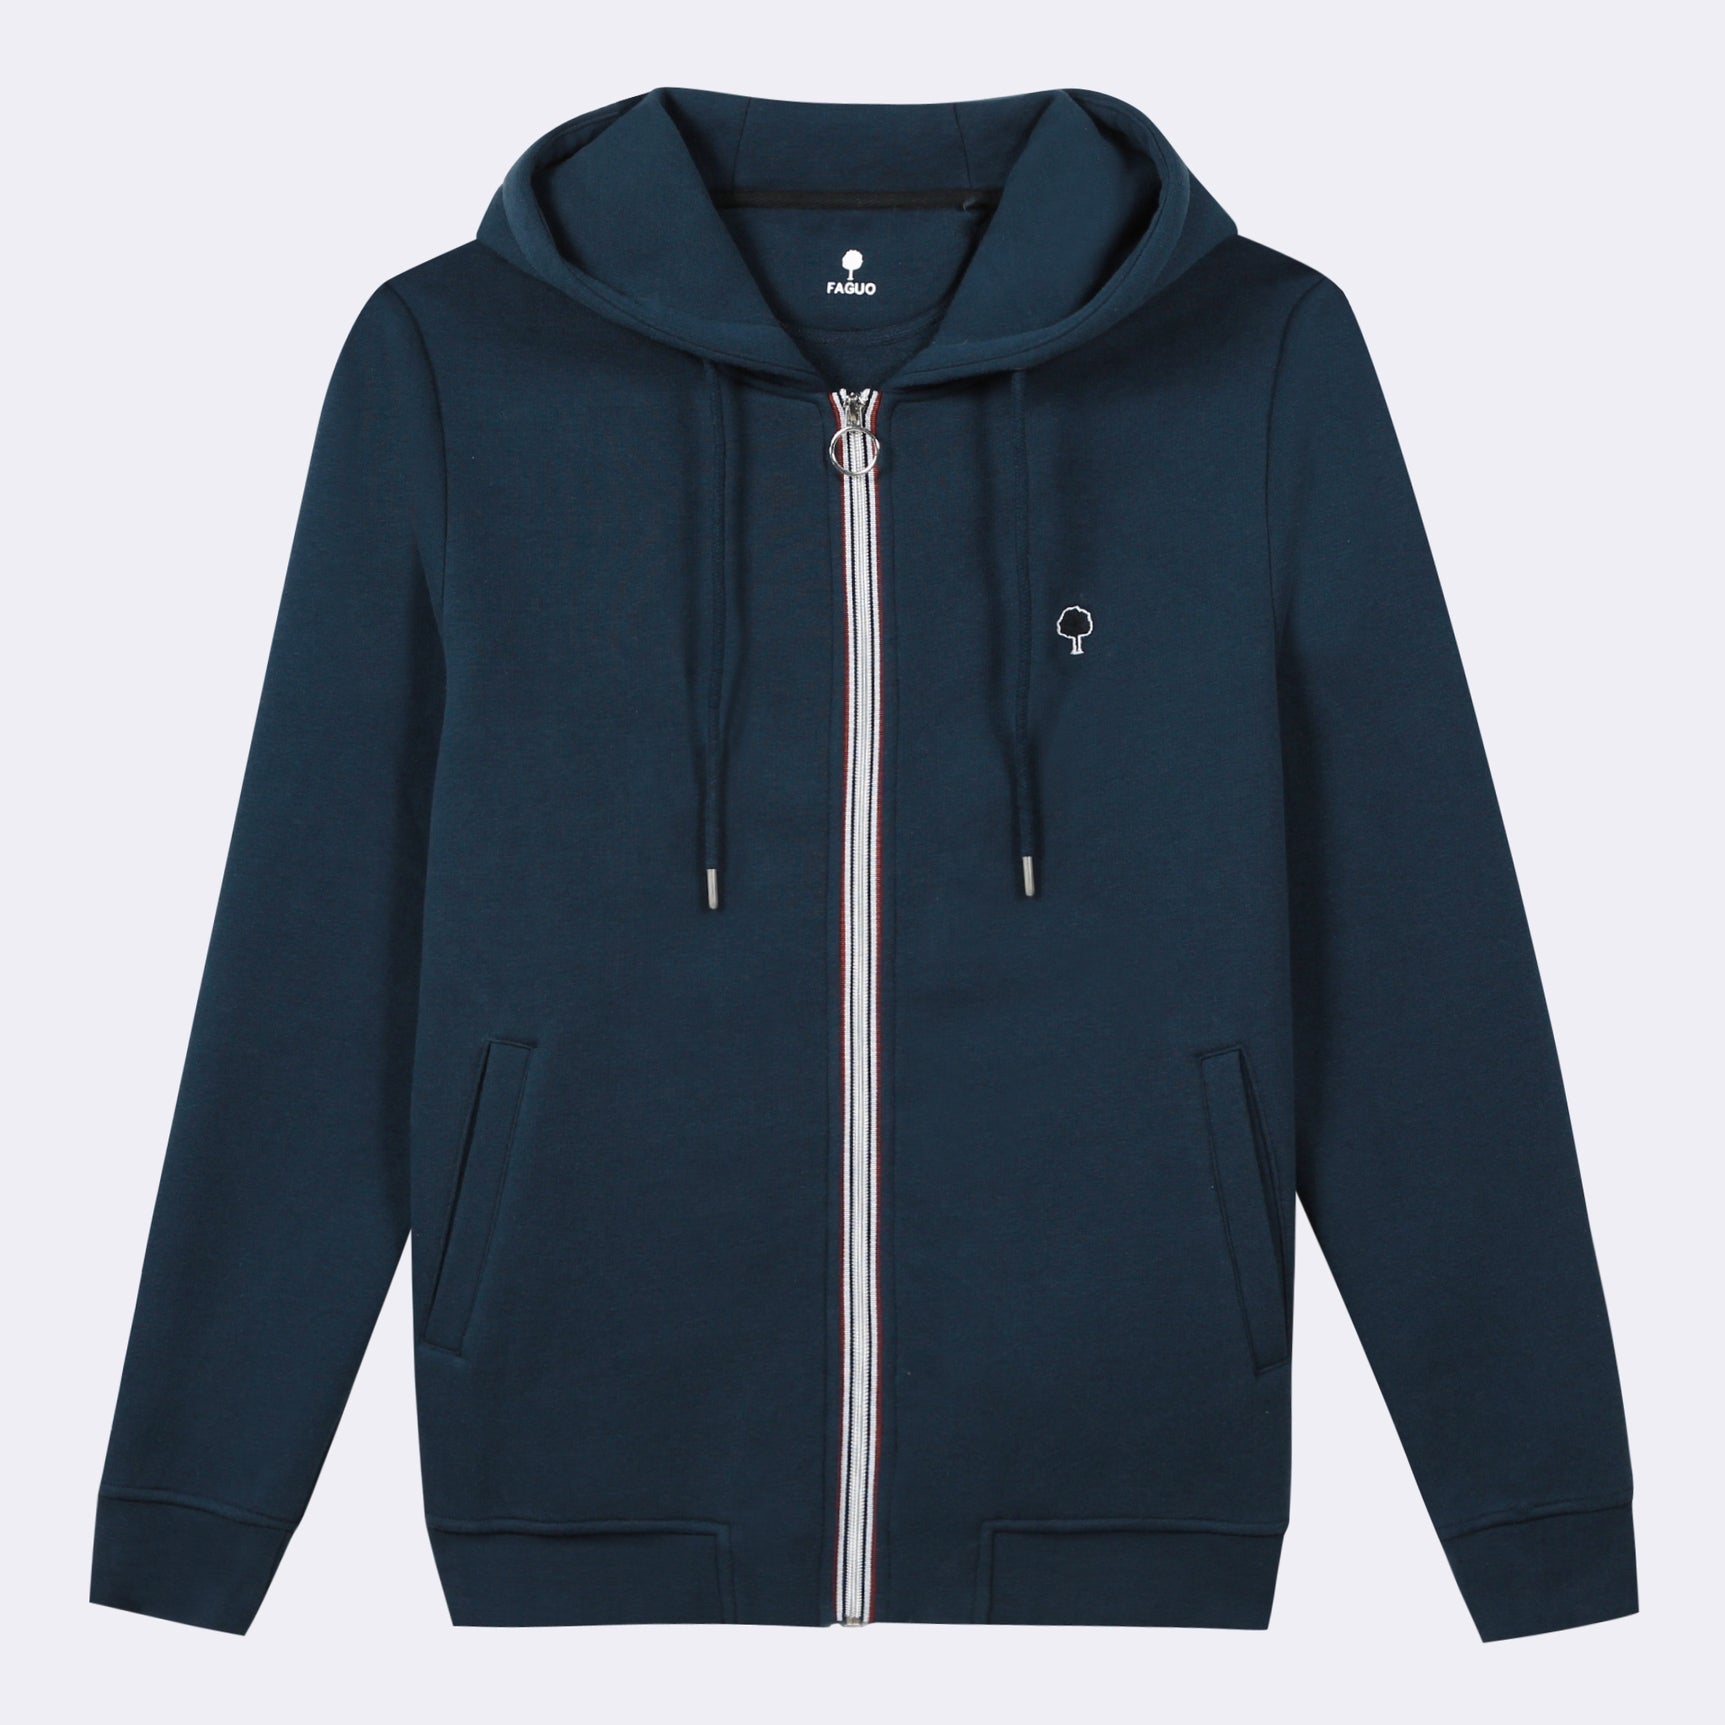 Faguo - Navy Blue hoodie in cotton - Mesnil - The Good Chic